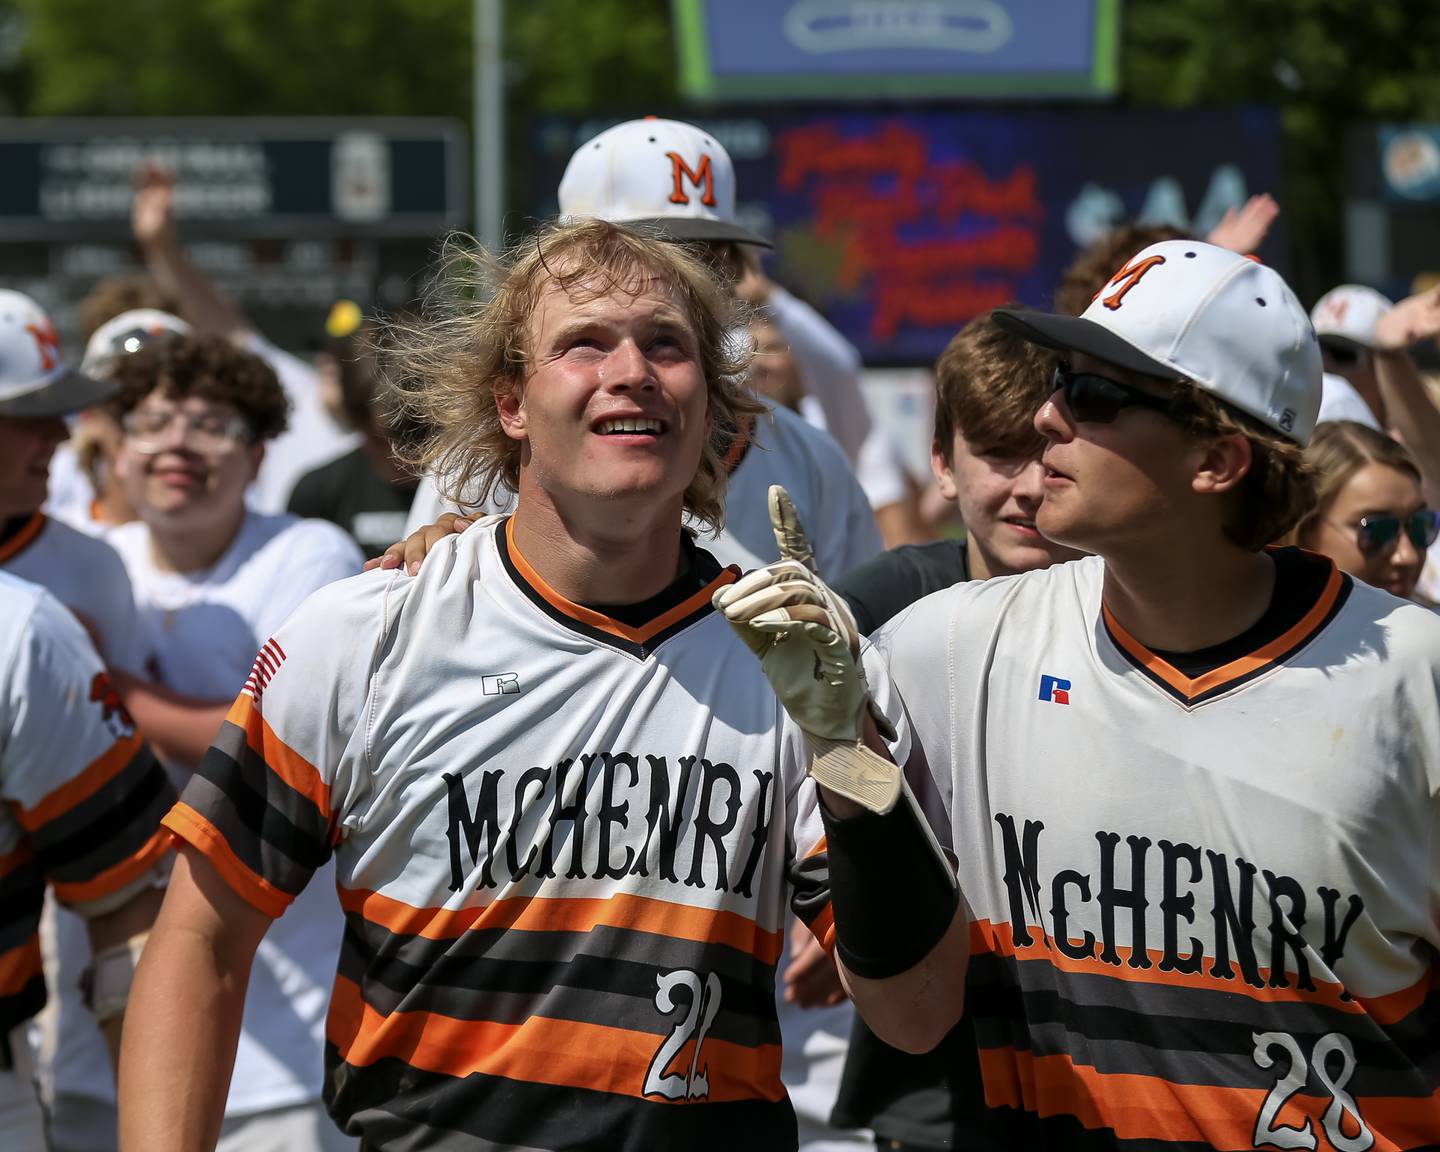 McHenry celebrates with Ricky Powell (22) after he hit the game winner to defeat York in the Class 4A Supersectional game. June 7, 2022.